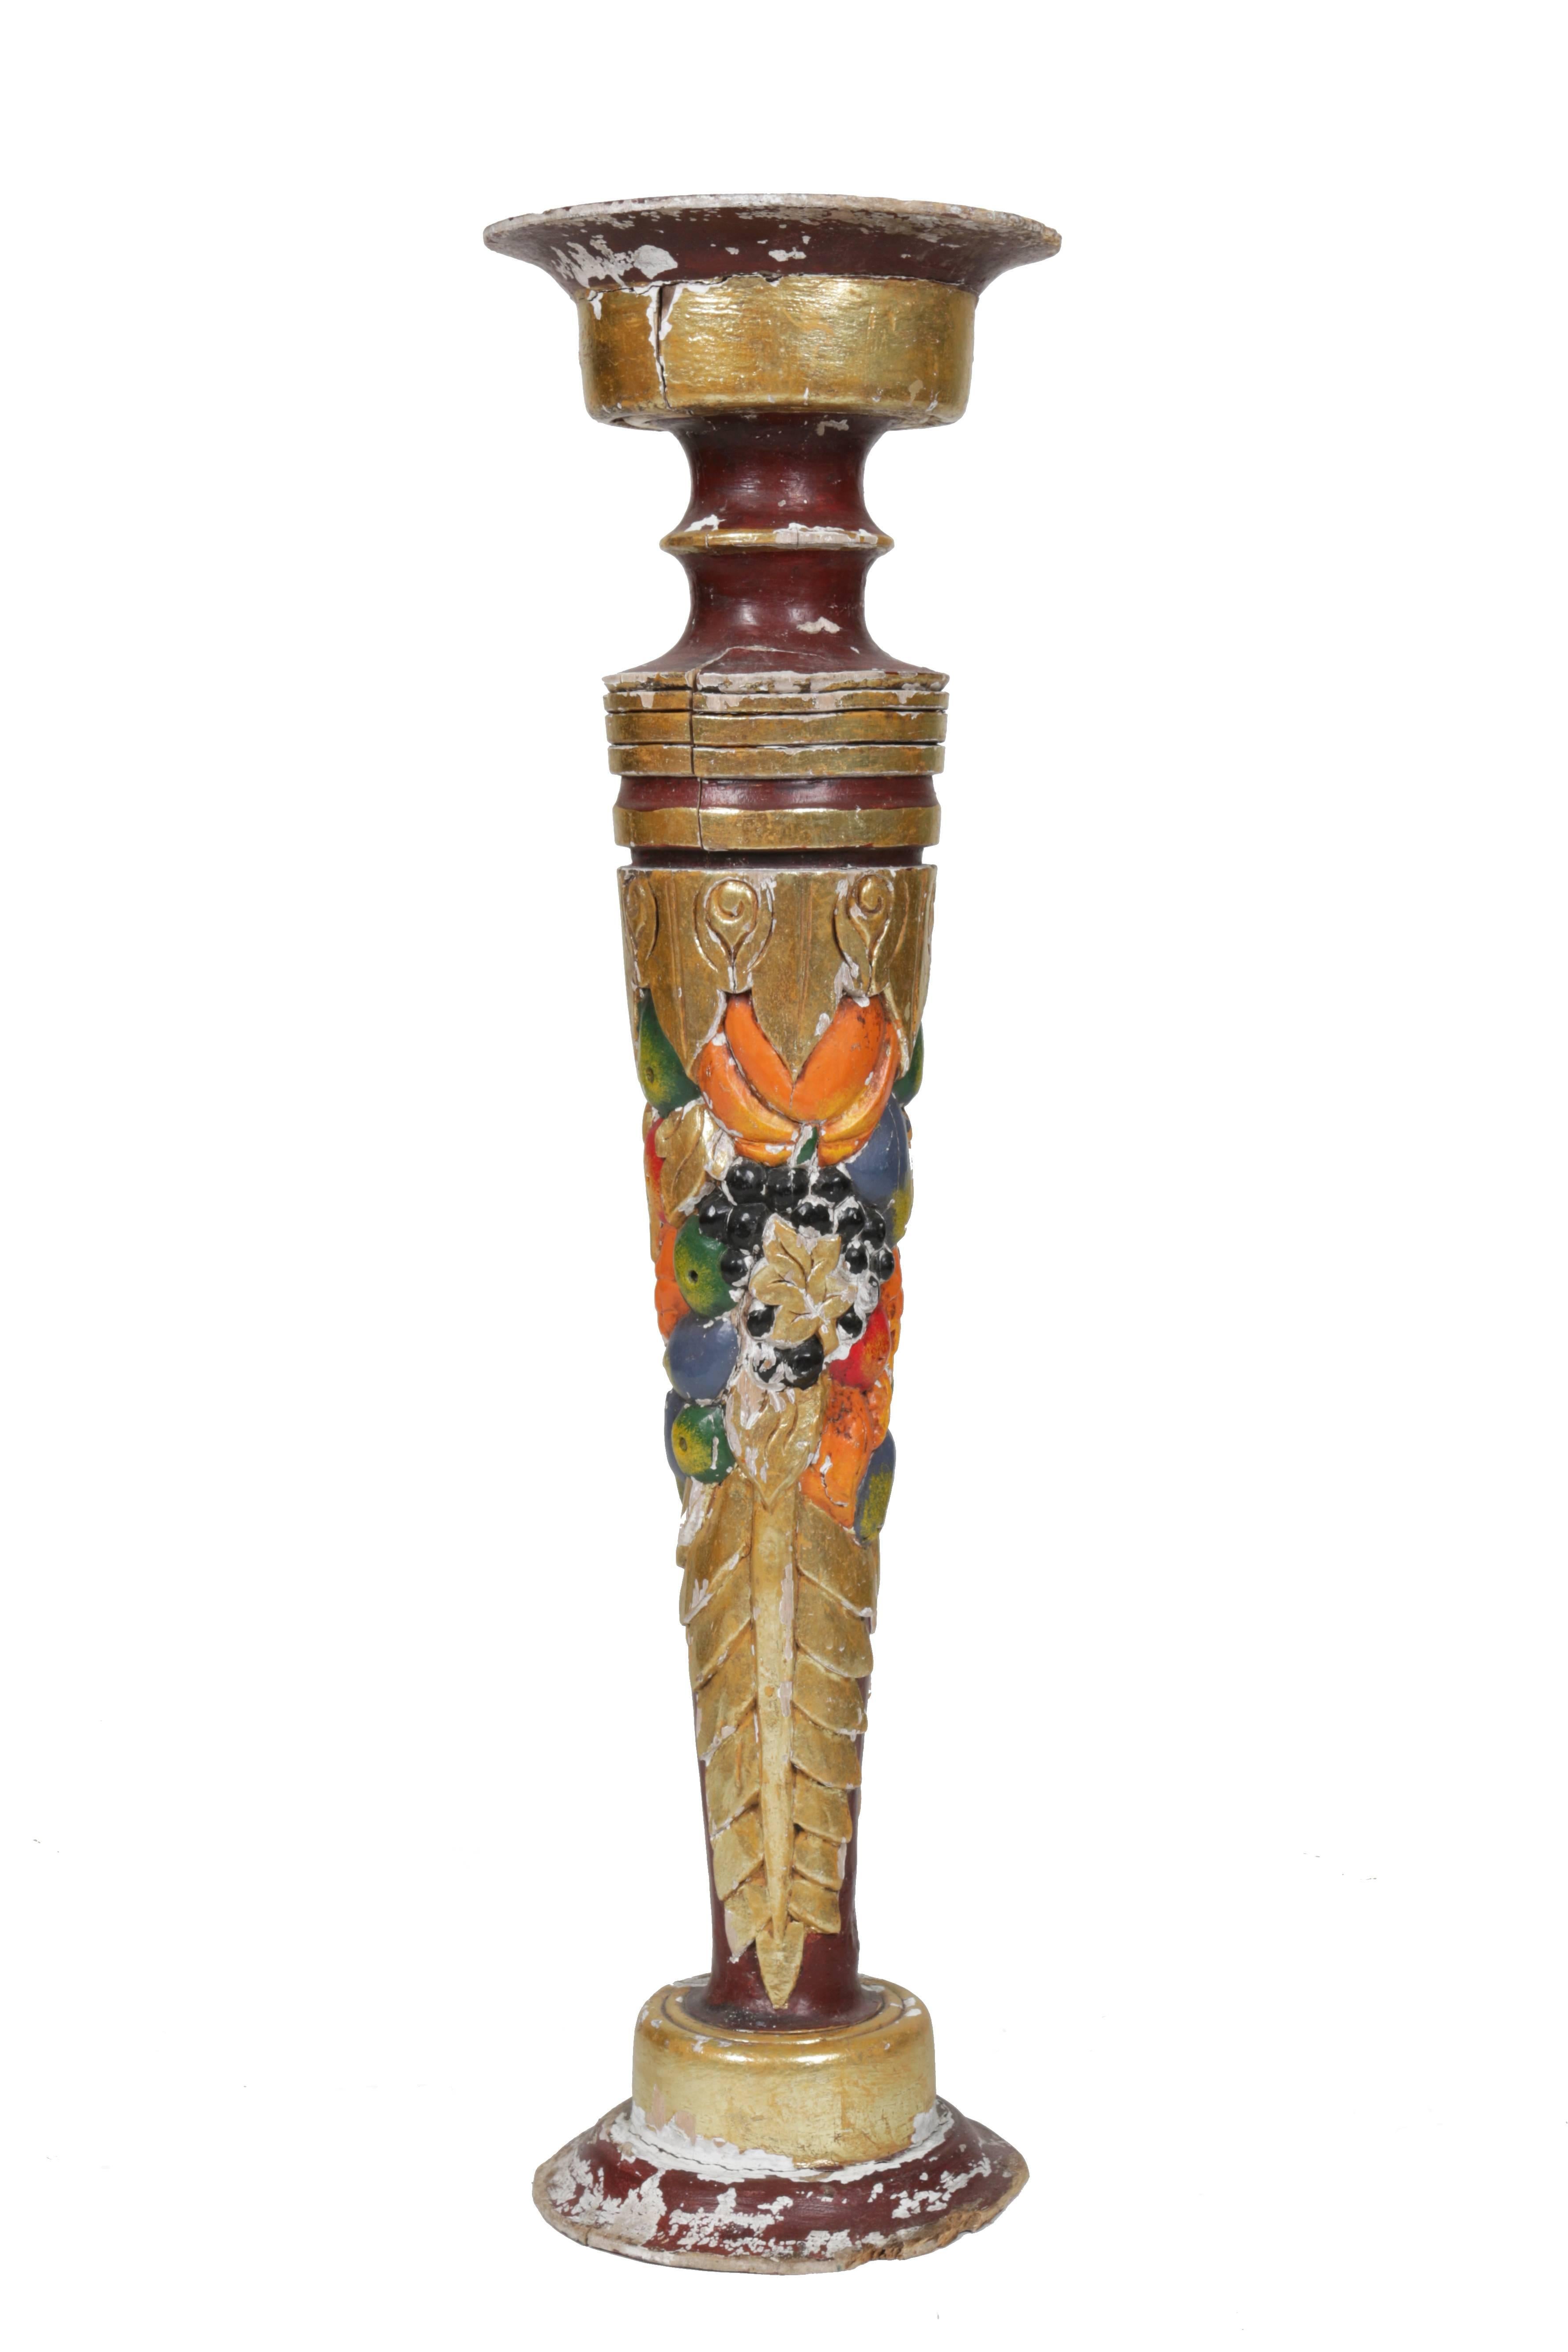 Original antique hand-carved, gessoed, and hand painted cornucopia wood pedestal. Beautiful and in totally original condition showing a lot of age appropriate wear, heavily patinated.